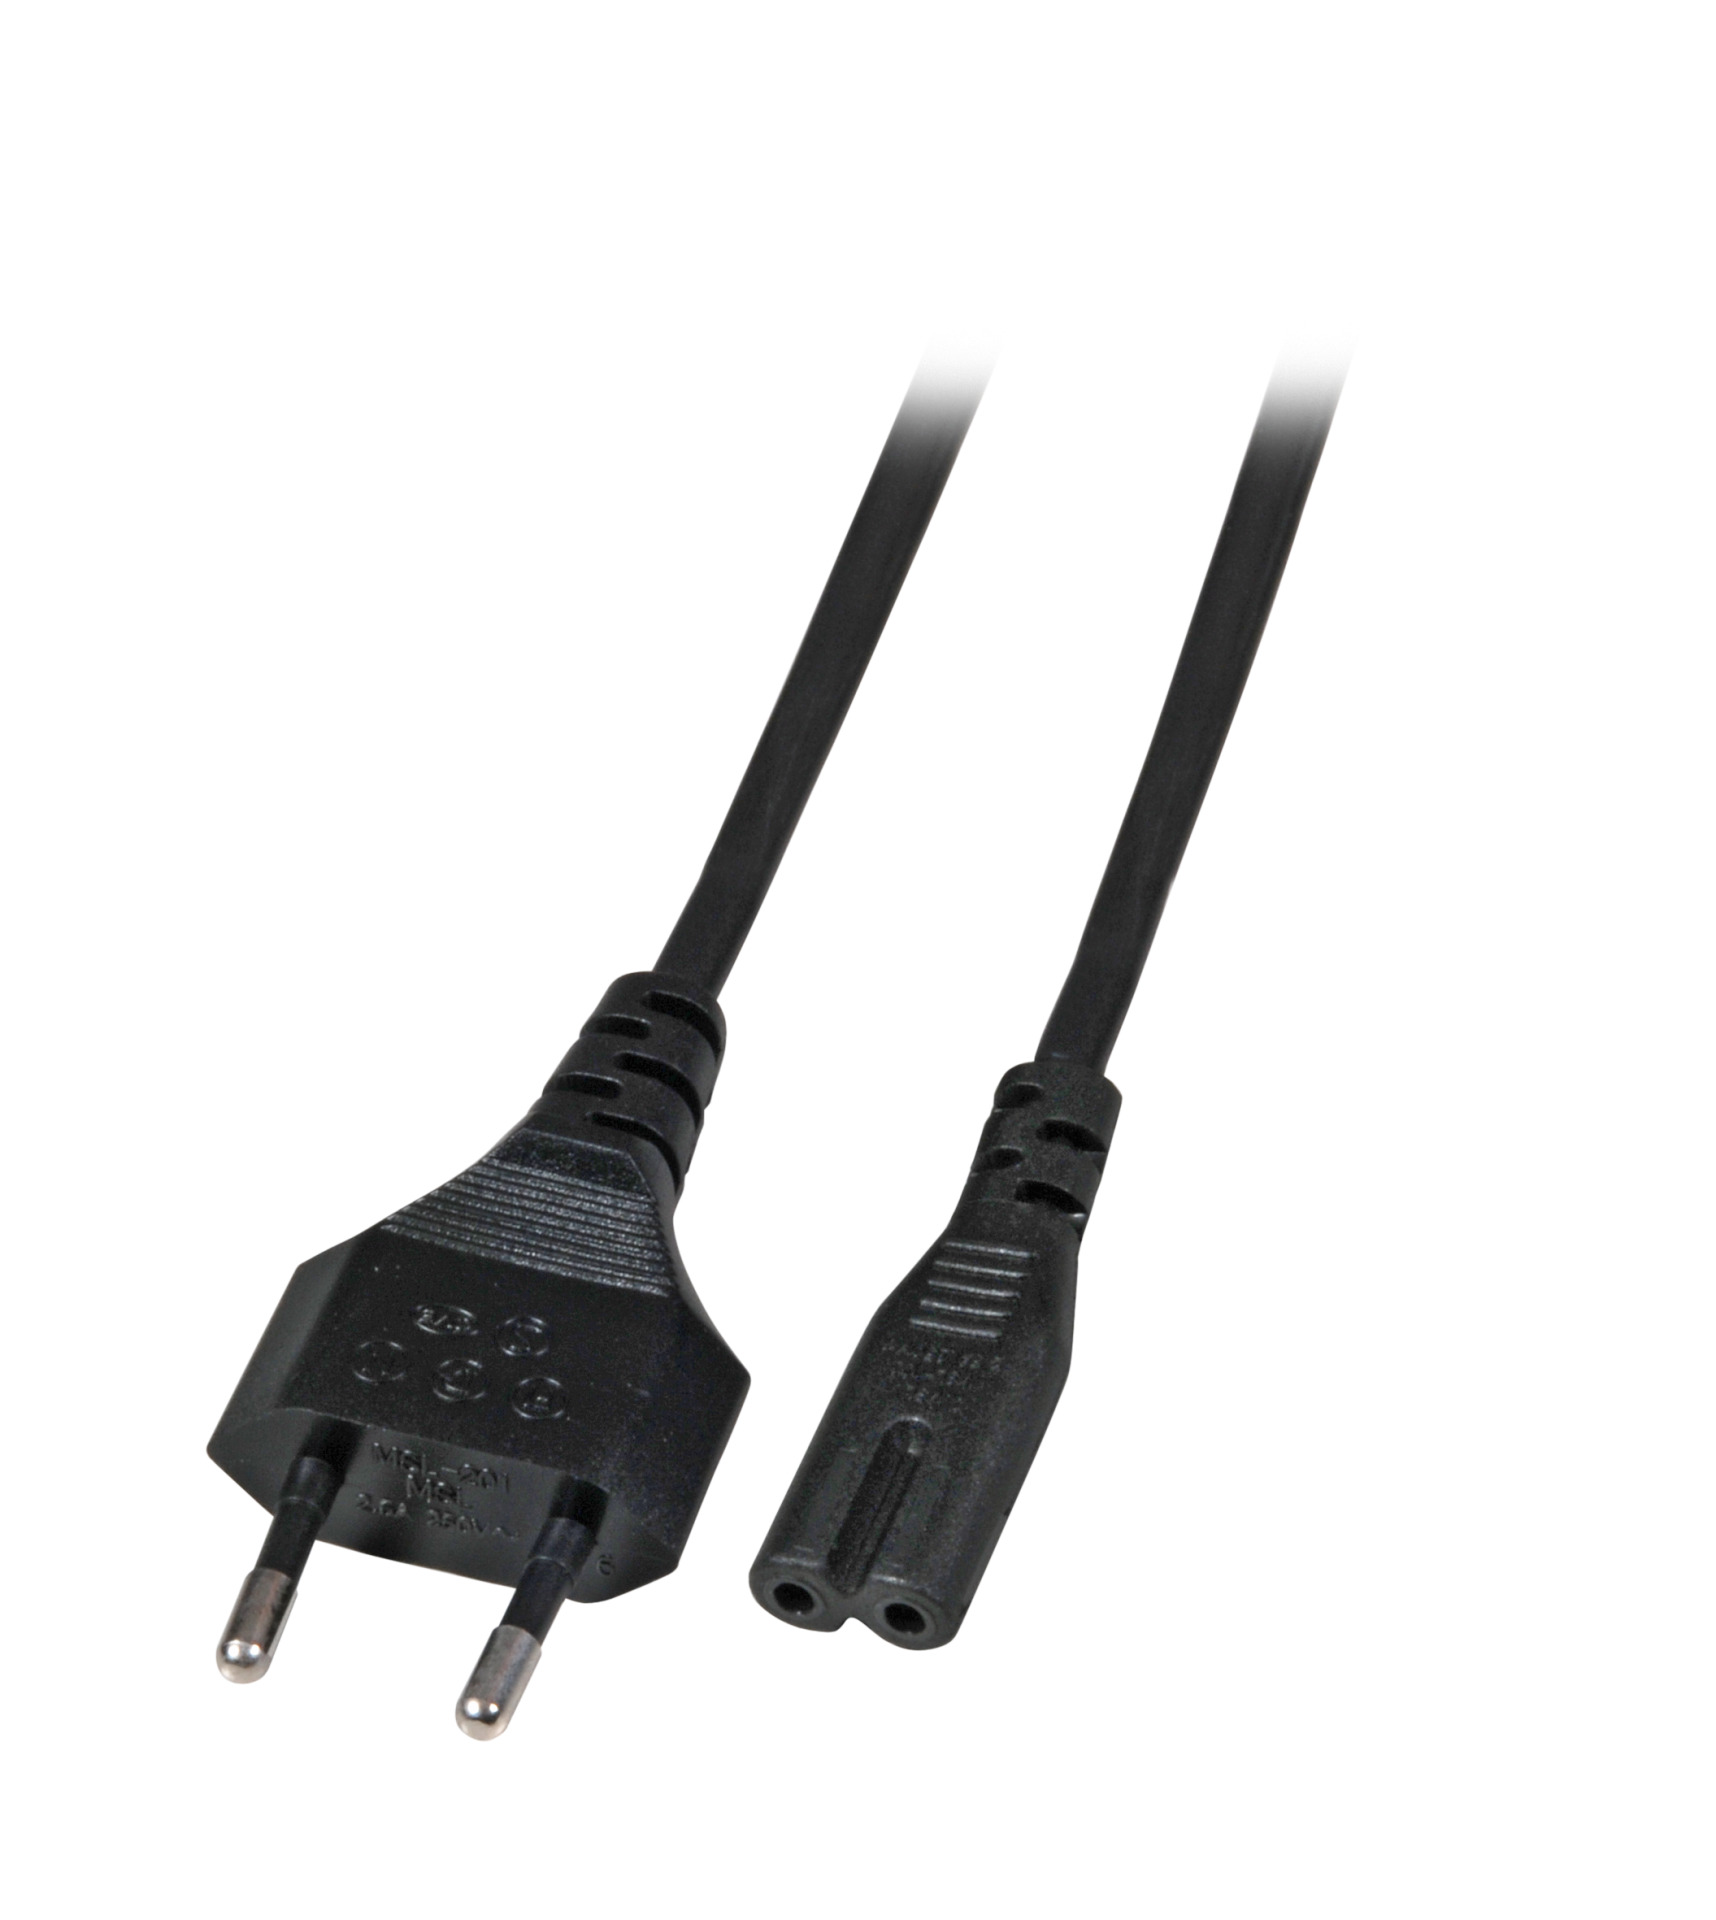 Power Cable Euro - C7 180°, Black, 2.0 m, 2 x 0.75 mm²